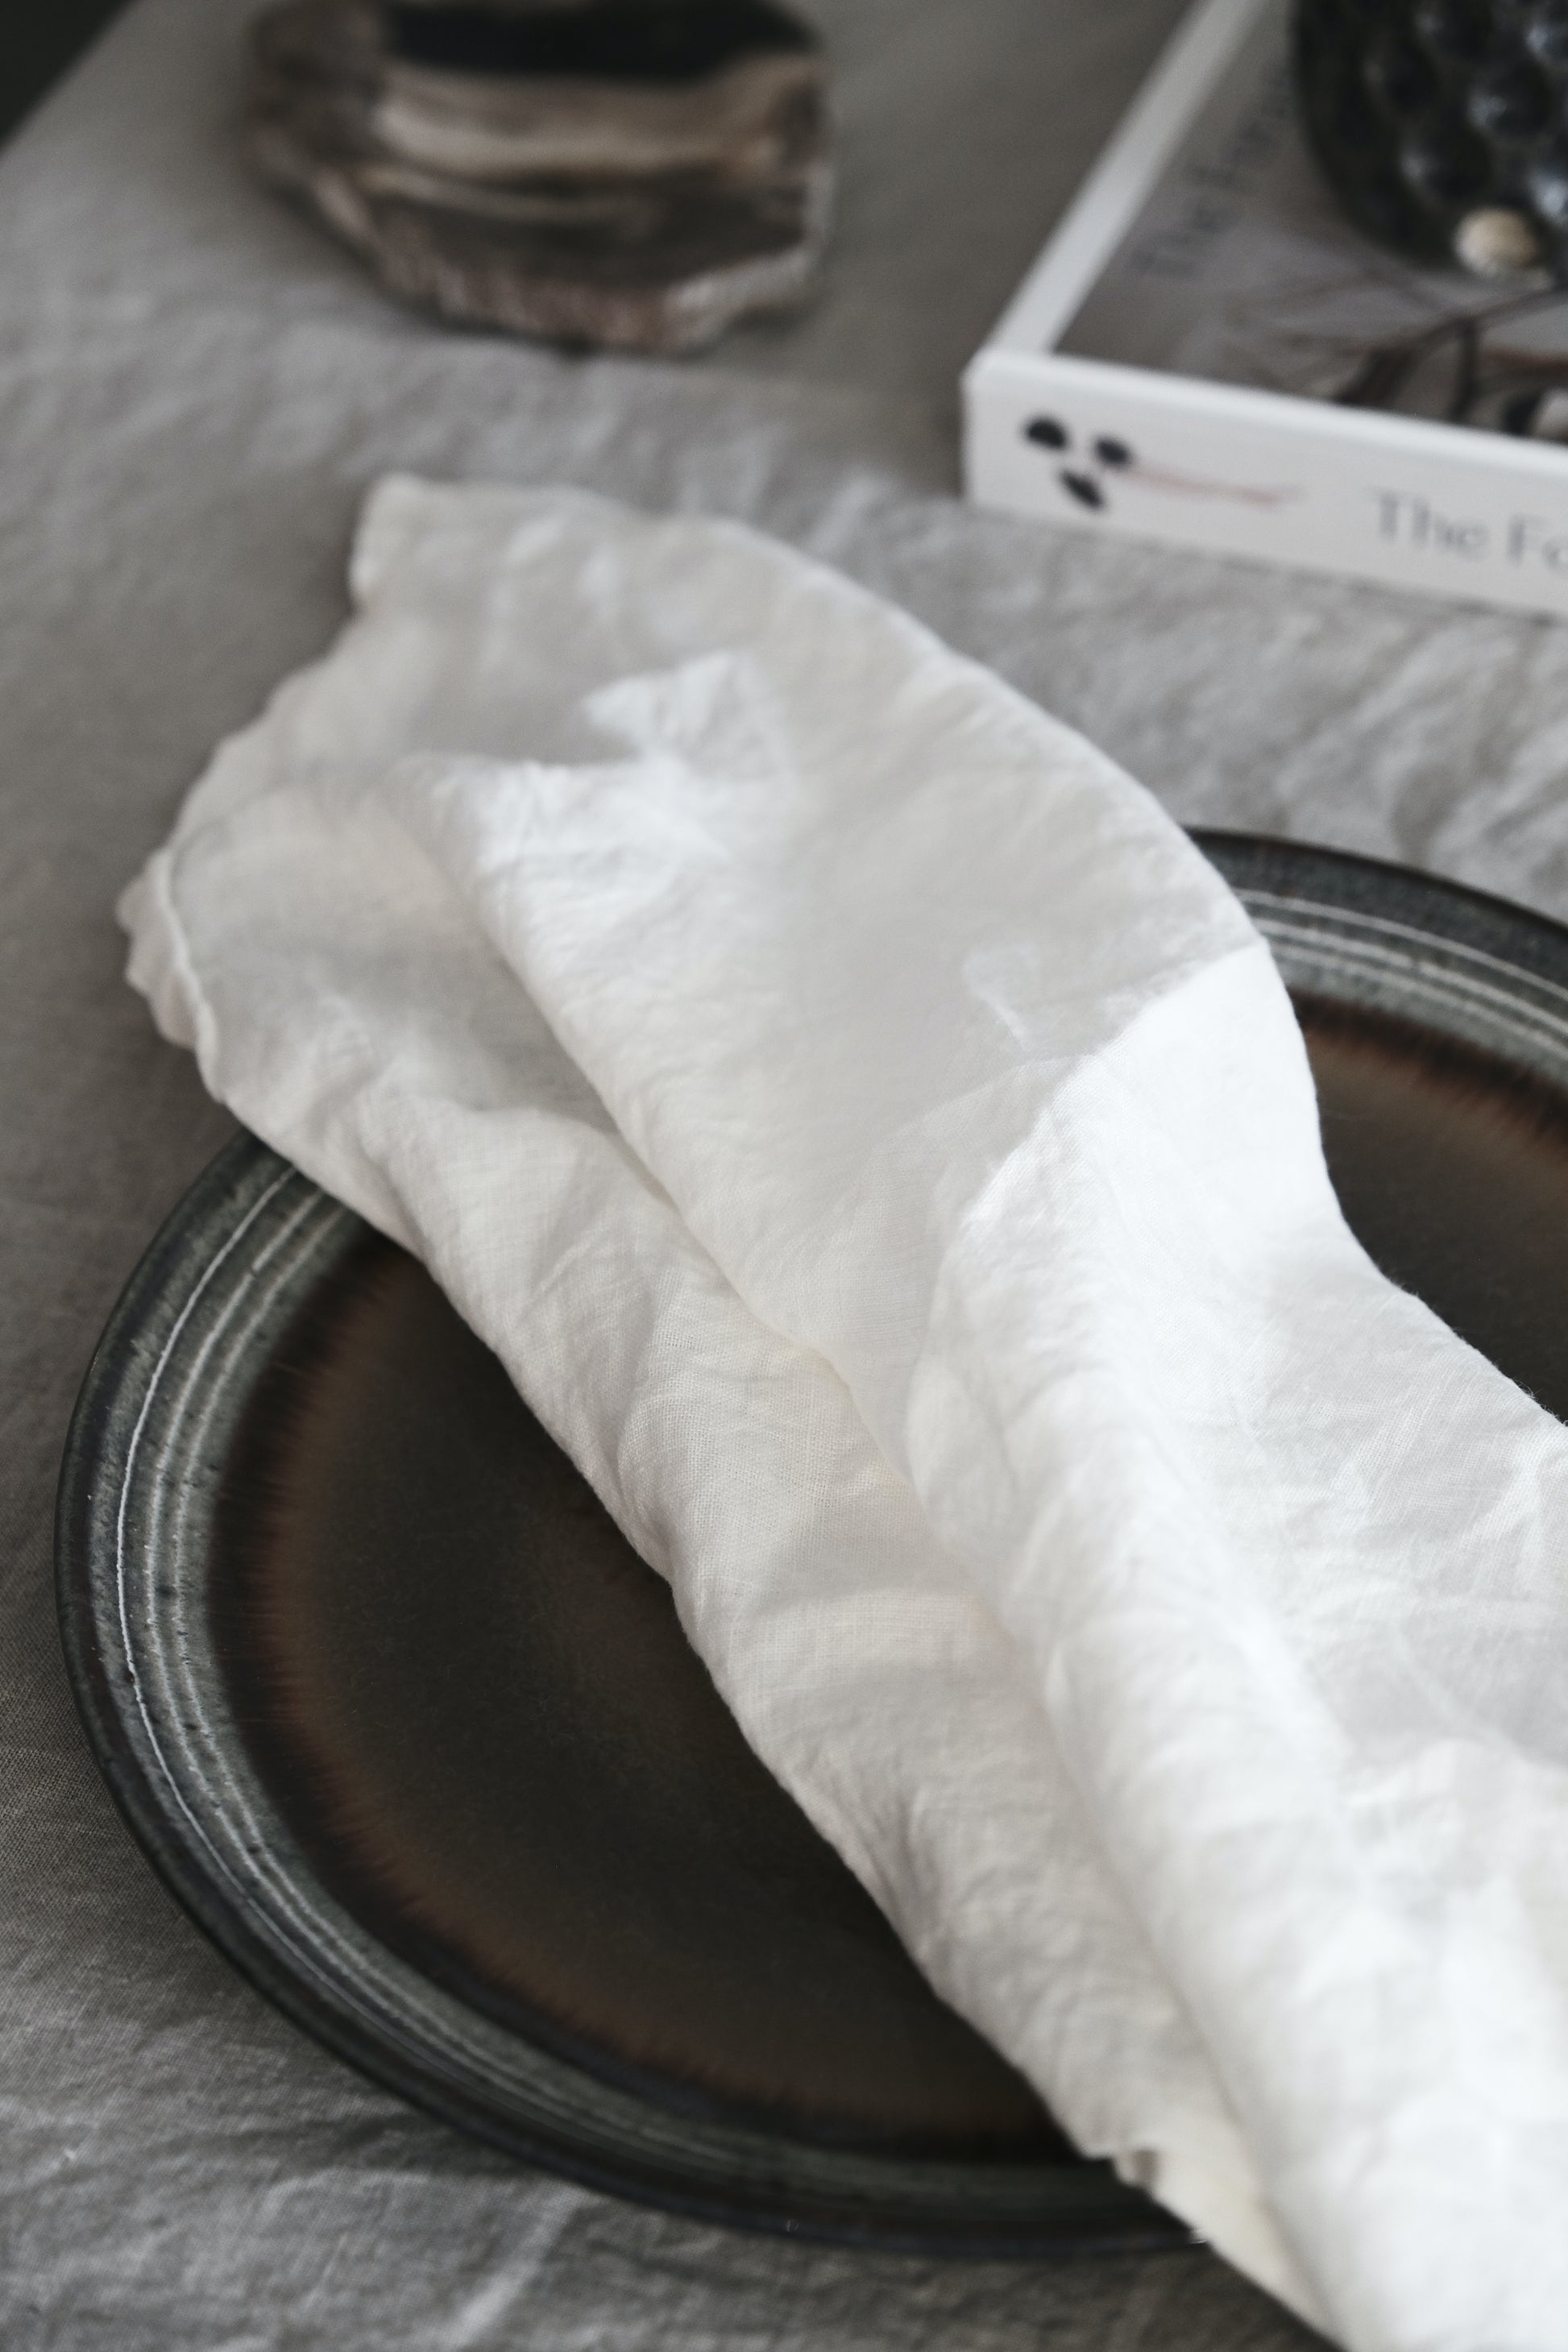 Image of Terra Cruda's dining collection with the Puglia linen napkins